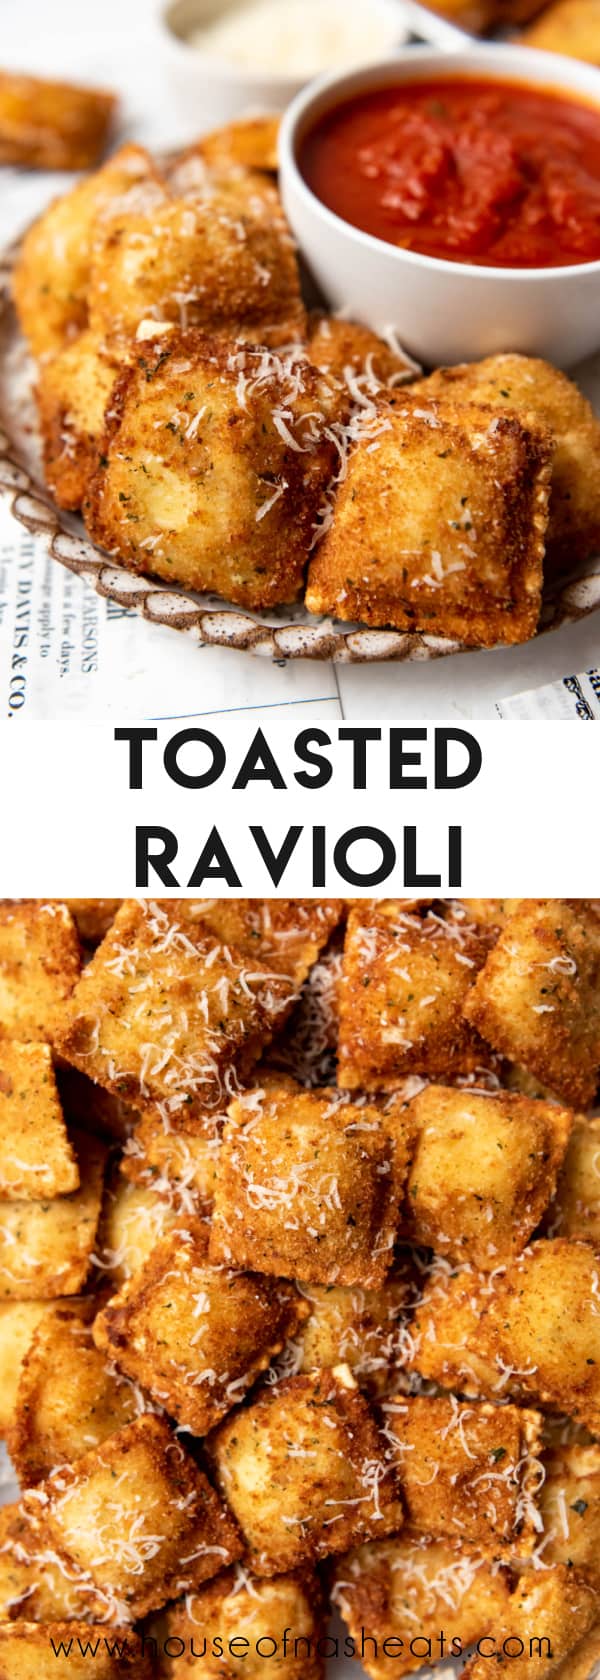 A collage of images of toasted ravioli with text overlay.